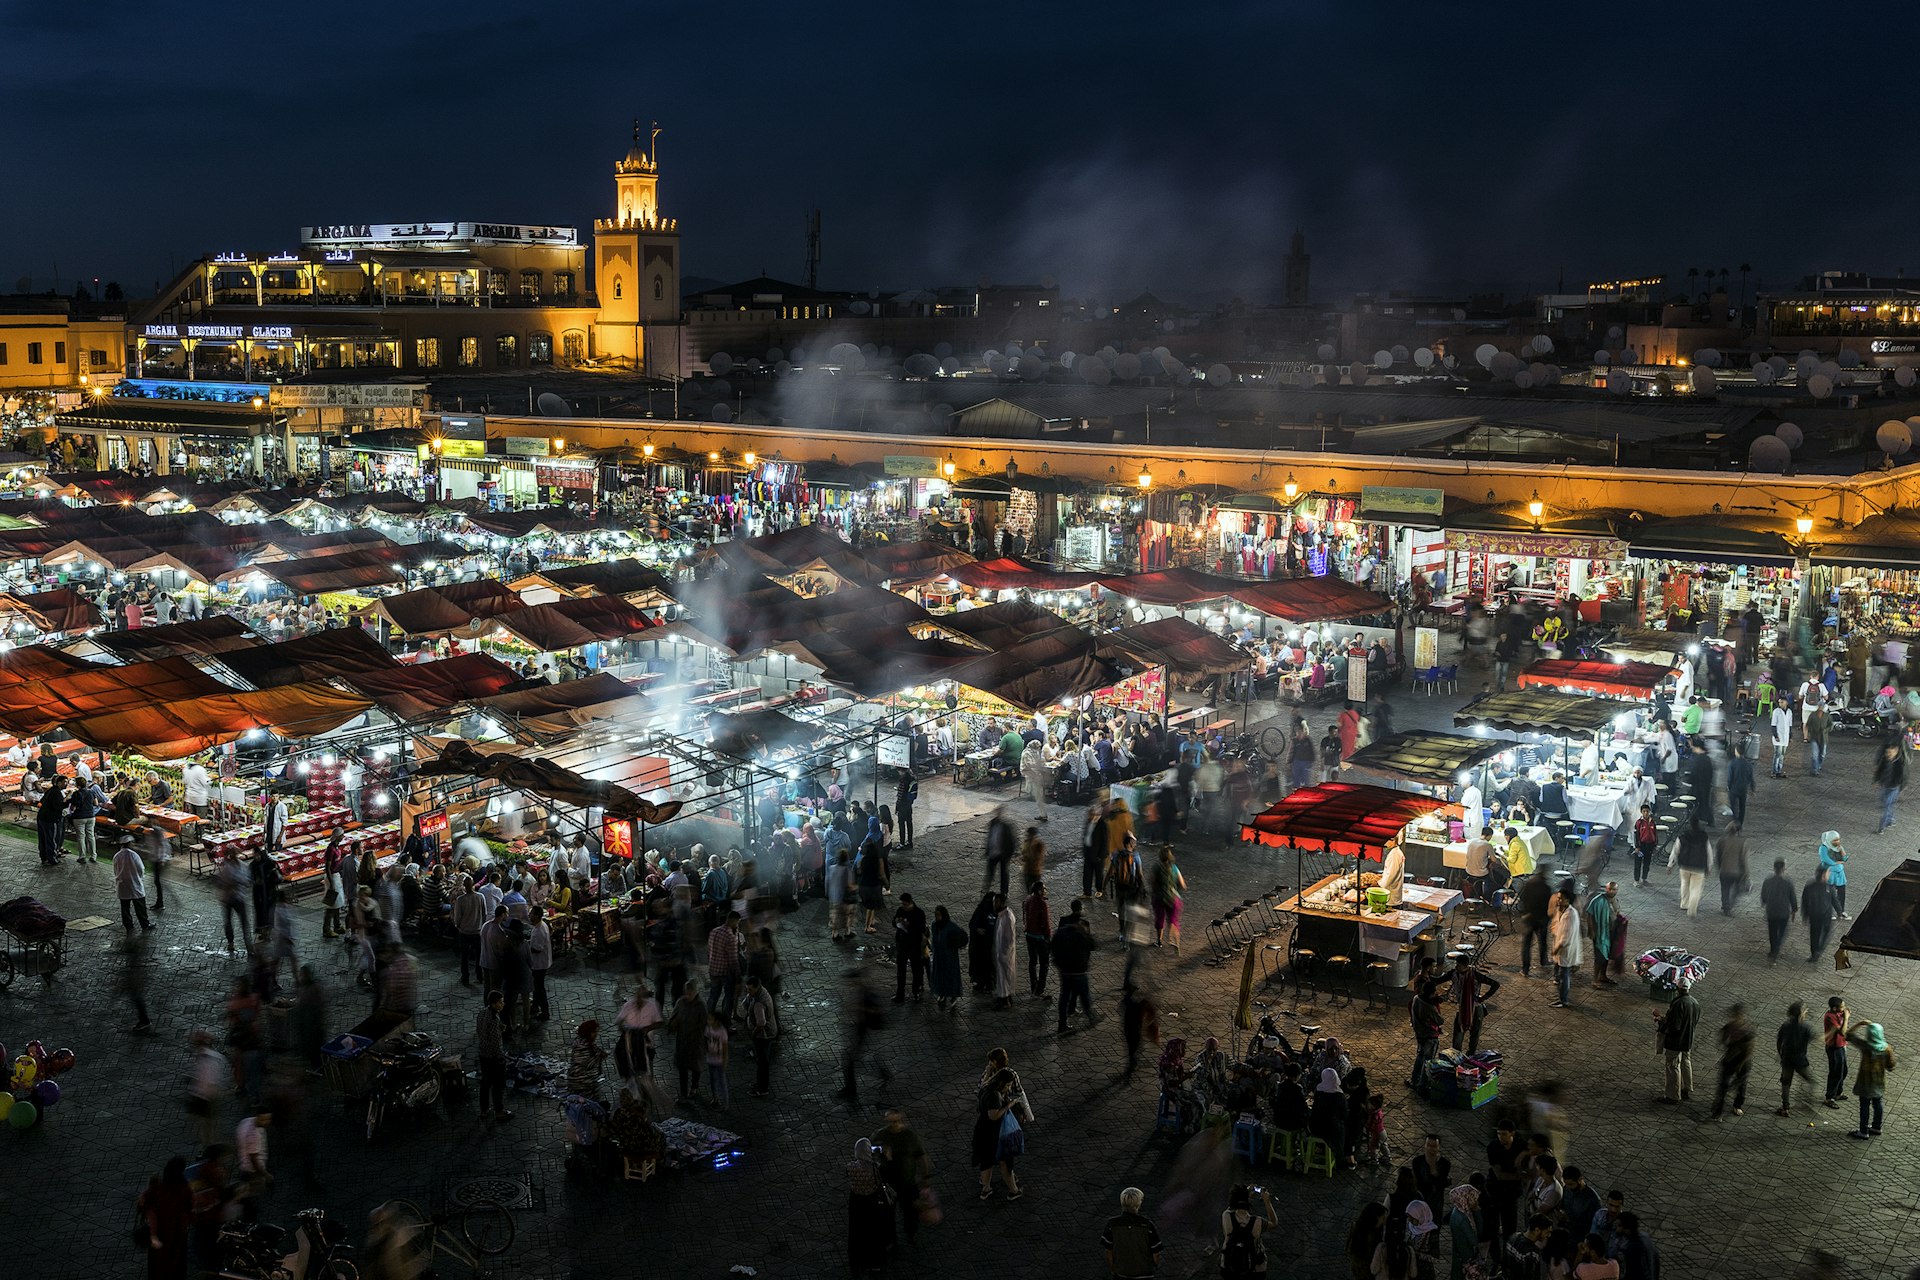 A market square at night with people milling around food stalls cooking fresh dishes